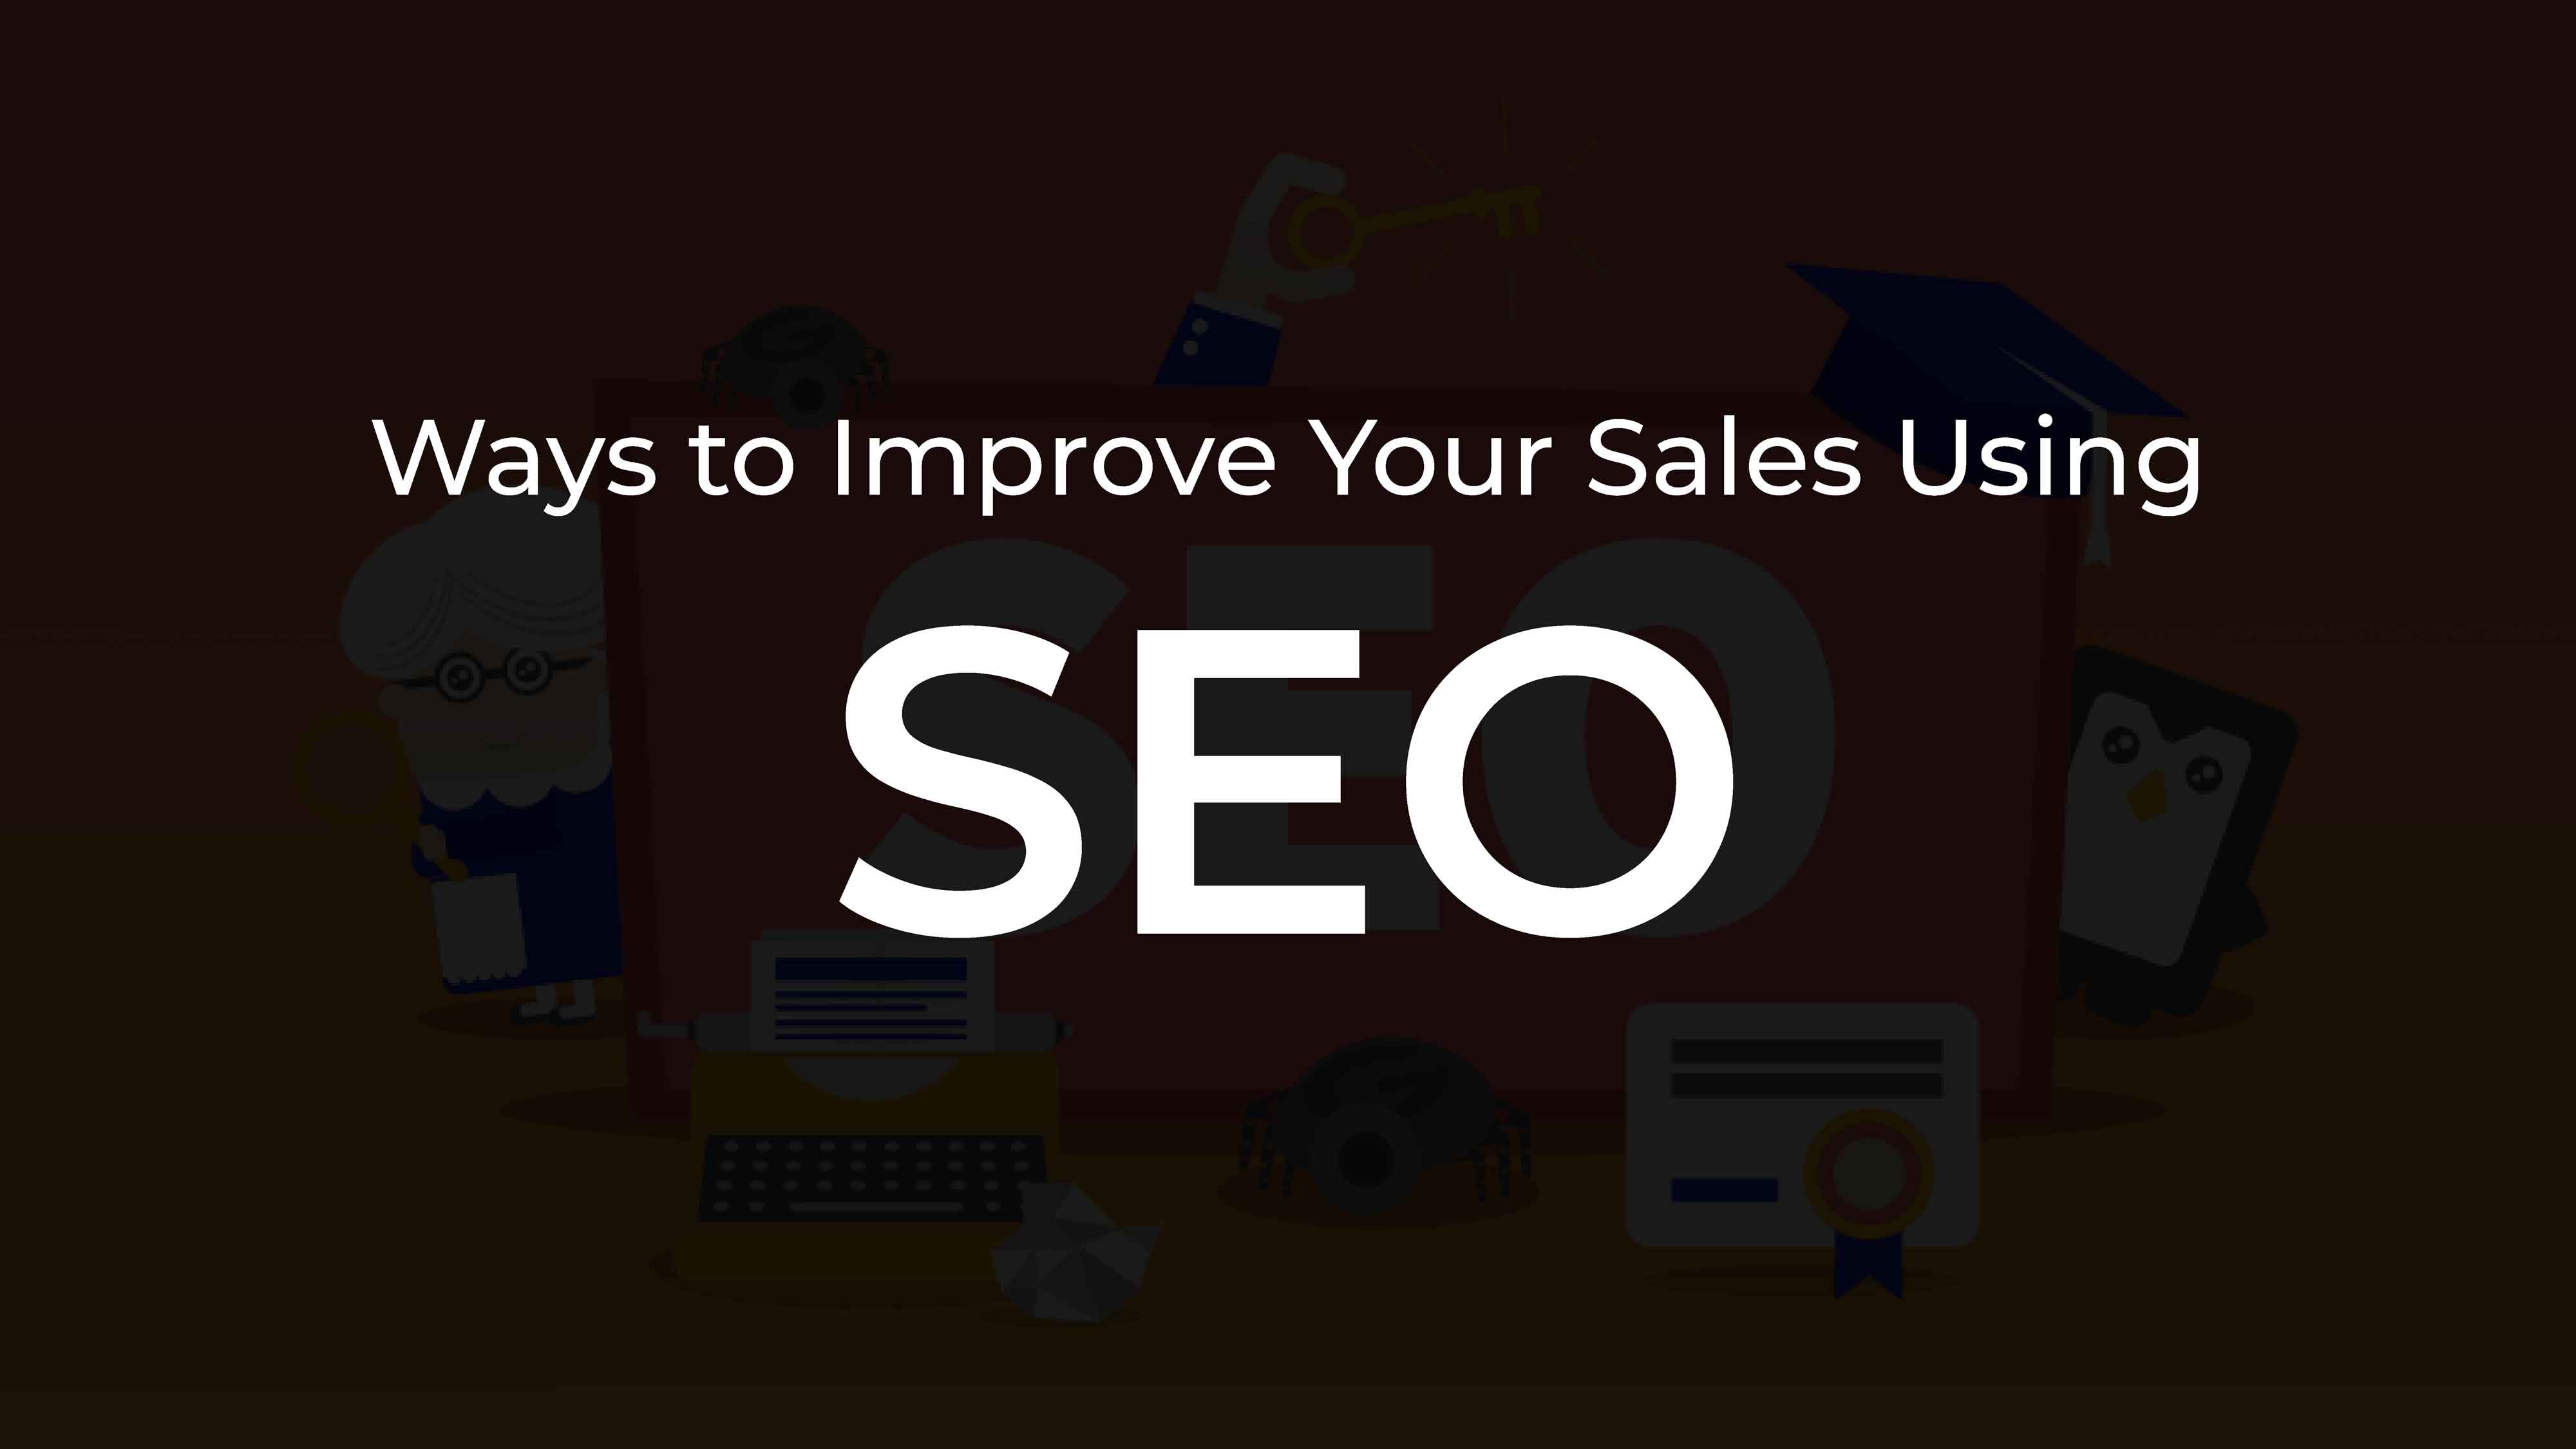 Ways to improve your sales using SEO